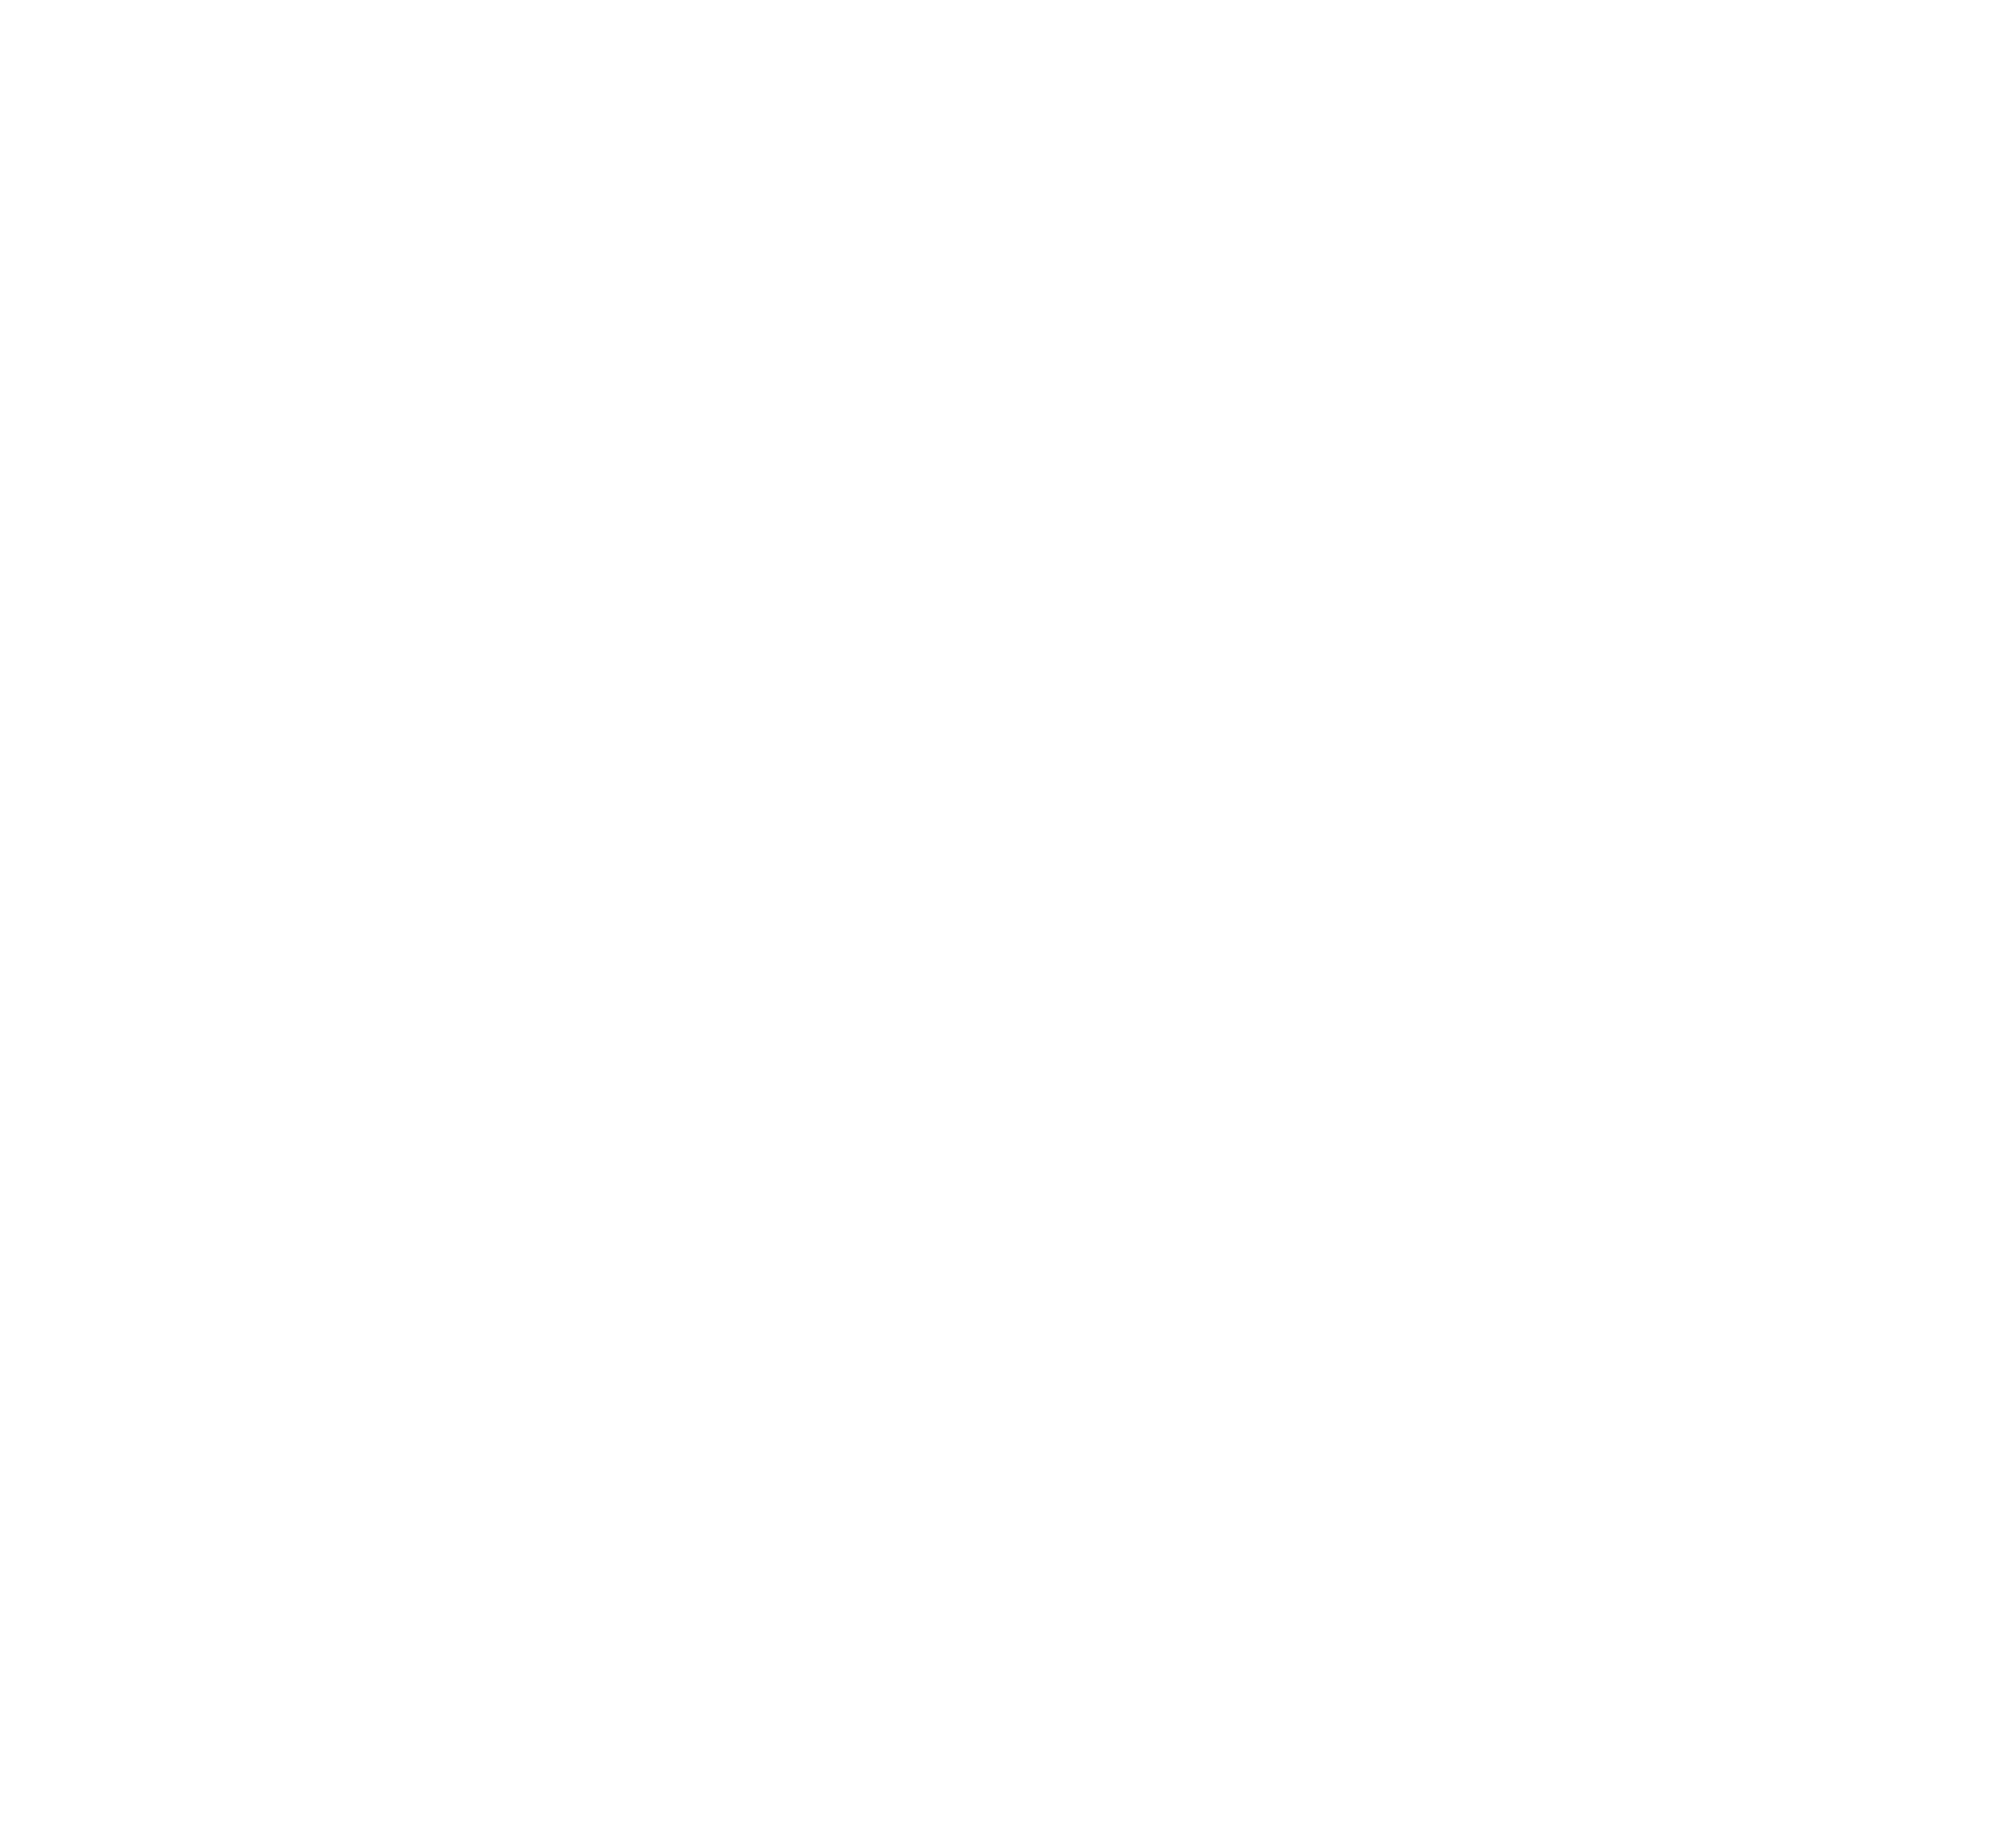 National Deaf Center logo in white colors on a black background.